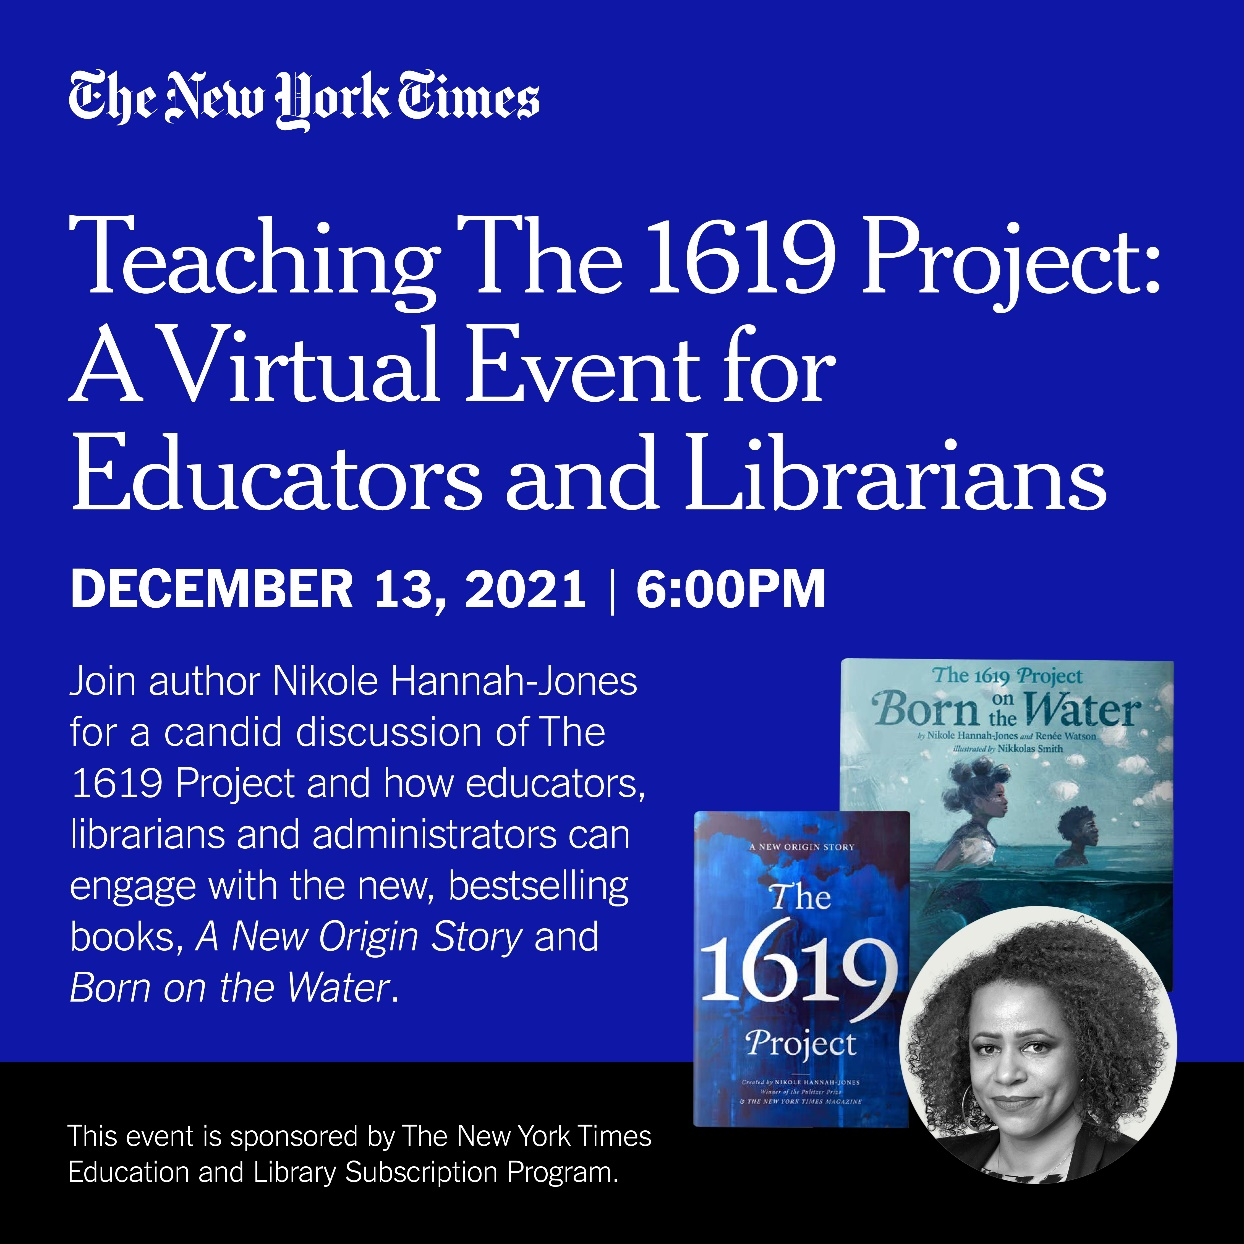 The New York Times 'Teaching the 1619 Project: A Virtual Event fo Educators and Librarians' image